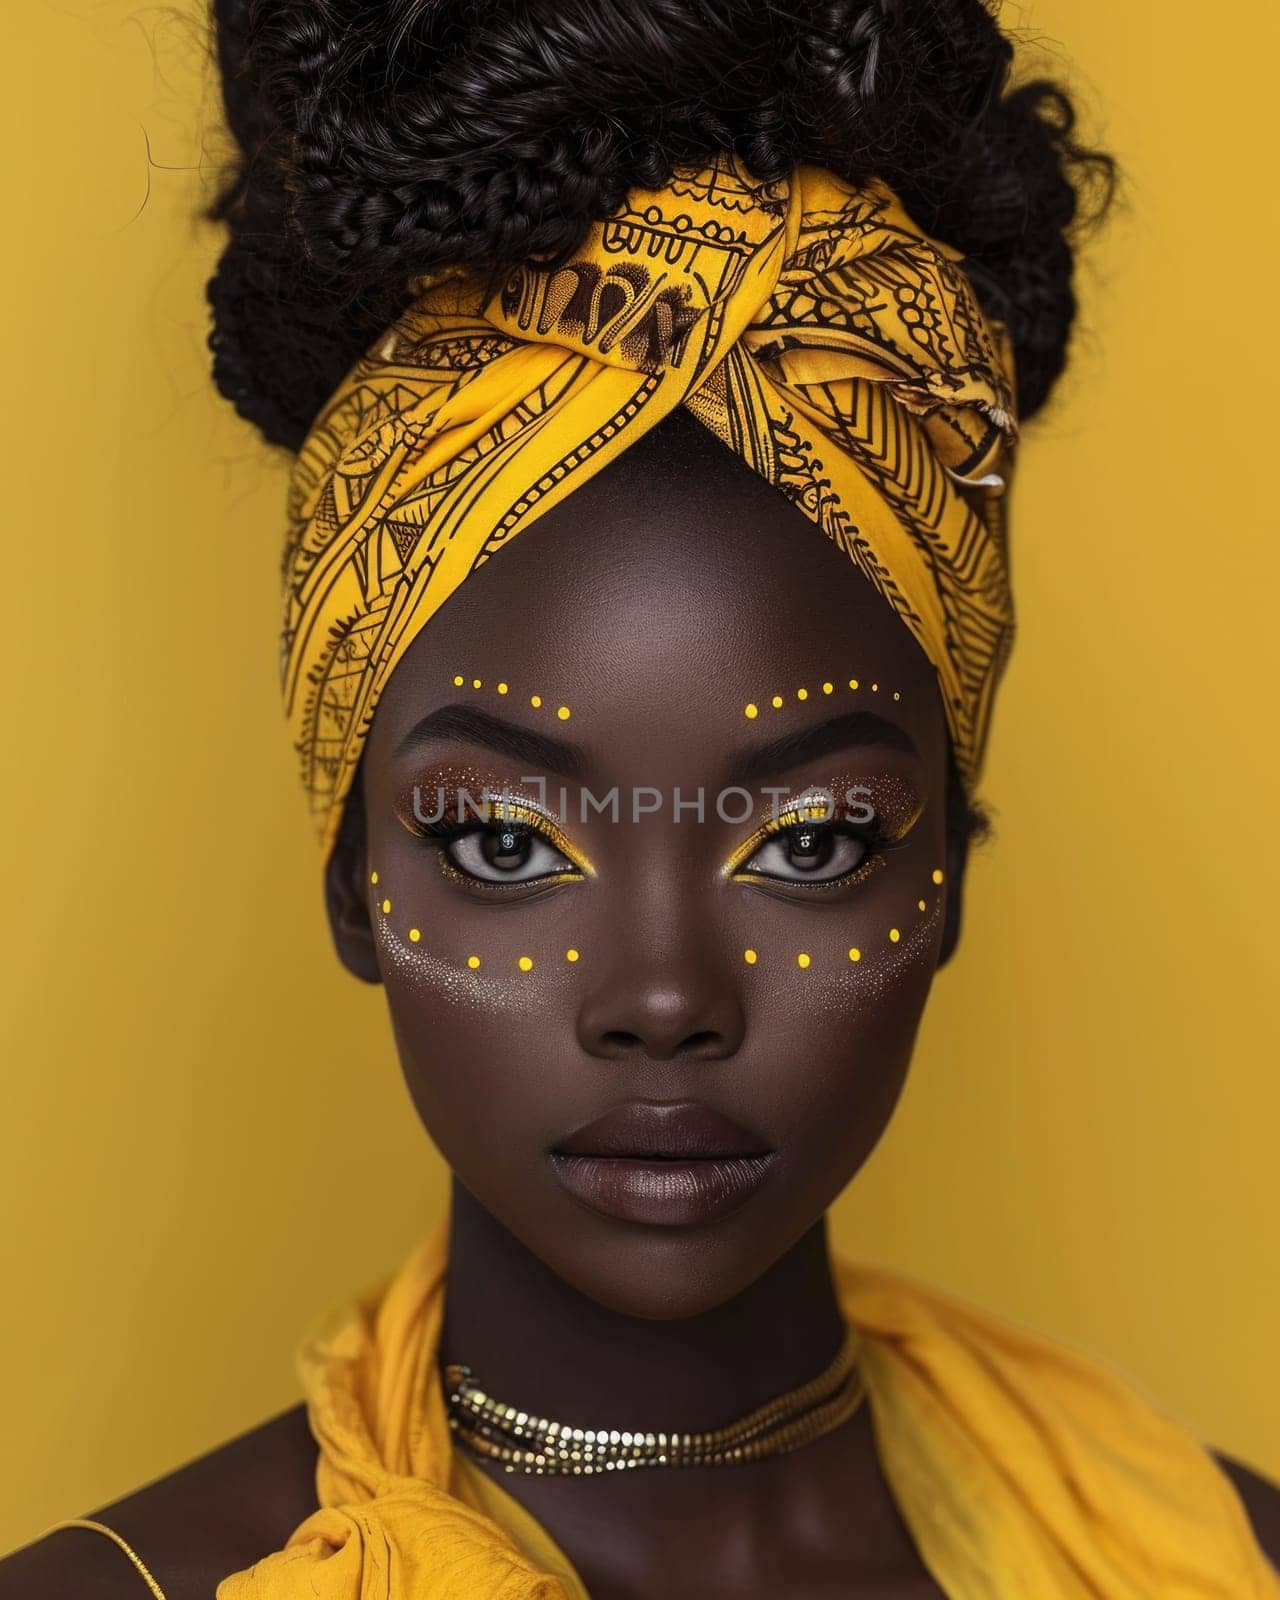 African American woman with yellow headband in stylish look by Yurich32